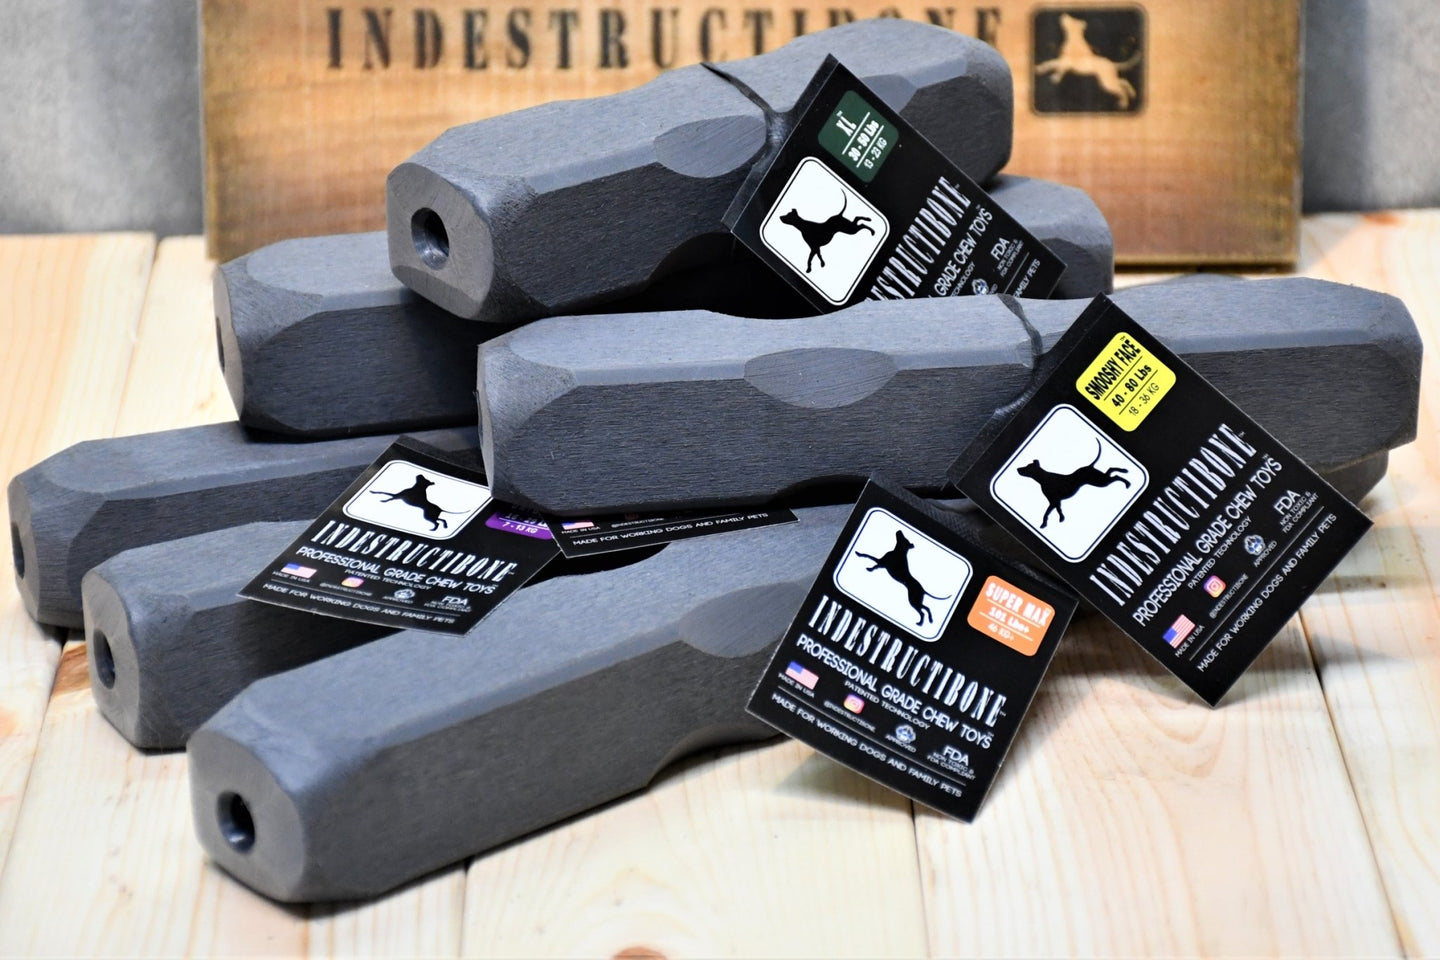 Indestructibone Super Ultimate Kennel Pack - Professional Grade Chew Toys - 6 sizes. - Bulletproof Pet Products Inc